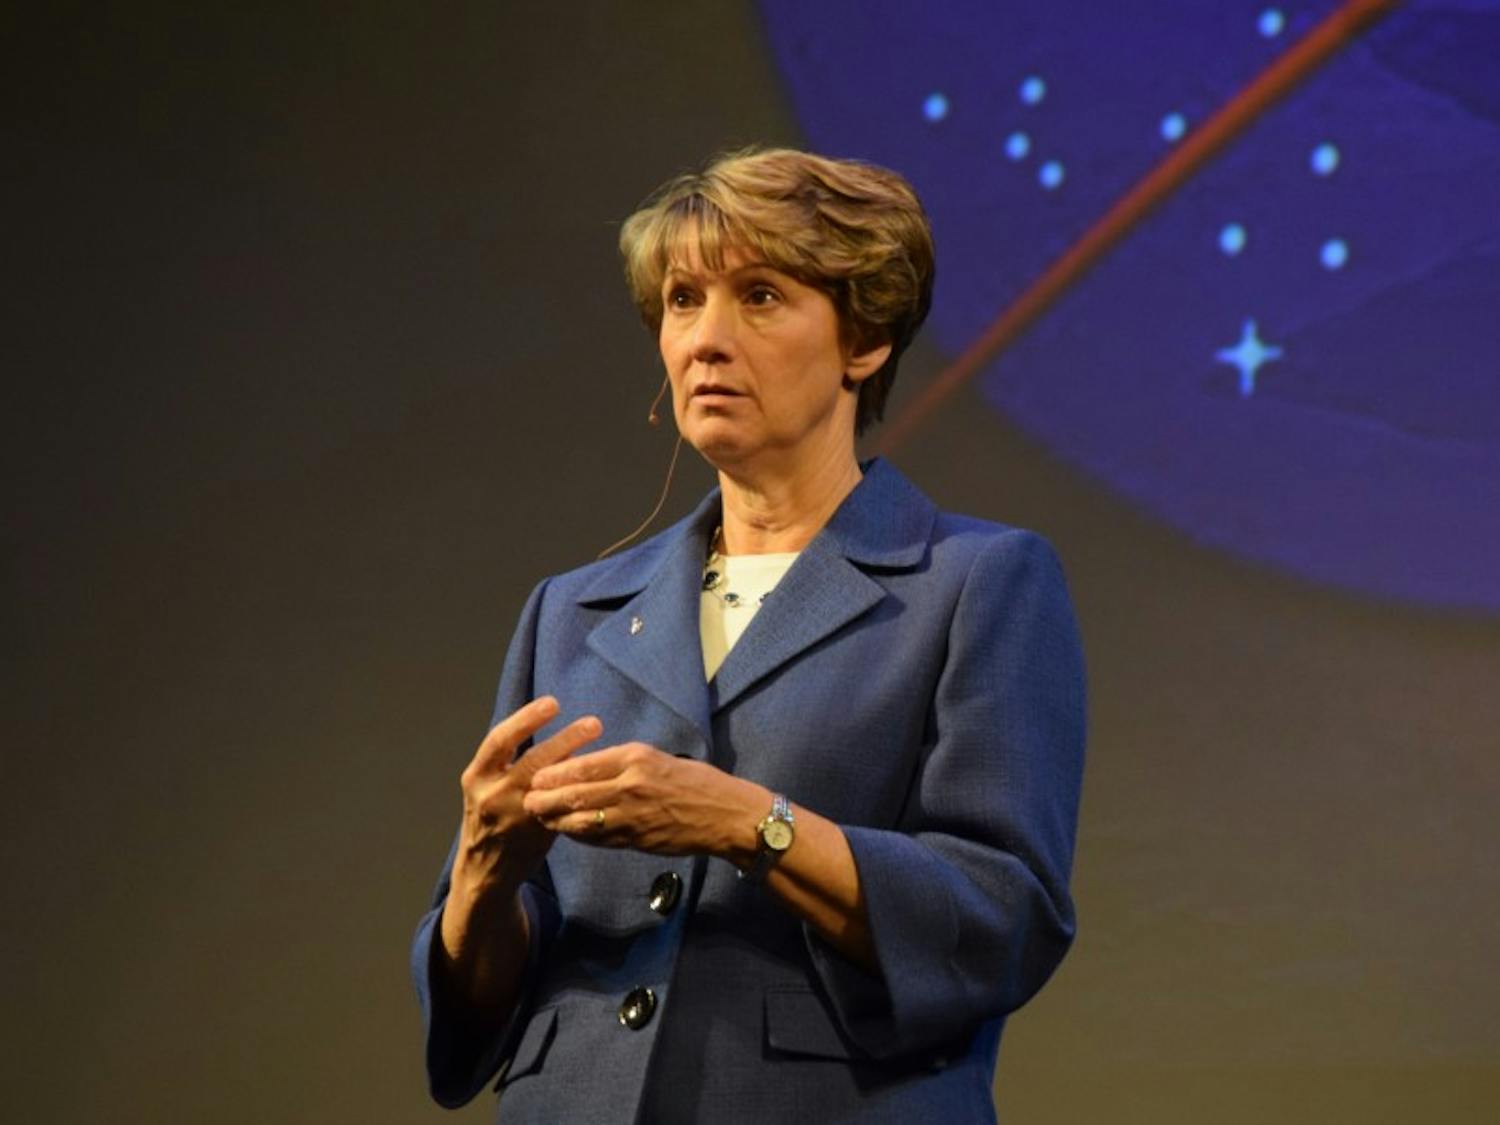 Colonel Eileen Collins, the first woman to pilot and command a NASA space shuttle, spoke as part of Wisconsin Union Directorate’s Distinguished Lecture Series Monday.